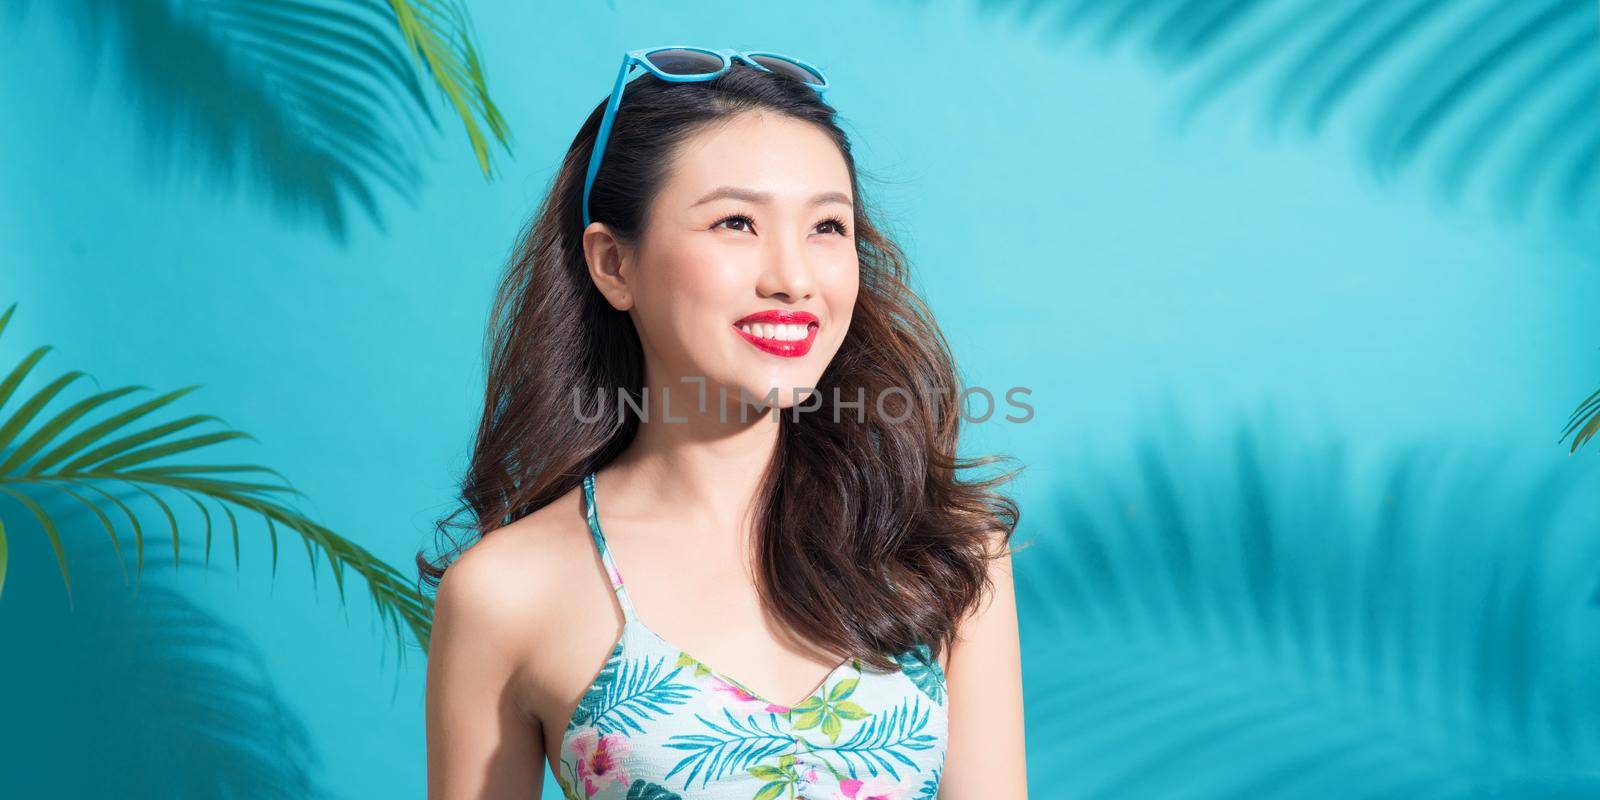 Banner size. Summer fashion girl standing and smiling over vibrant blue background by makidotvn